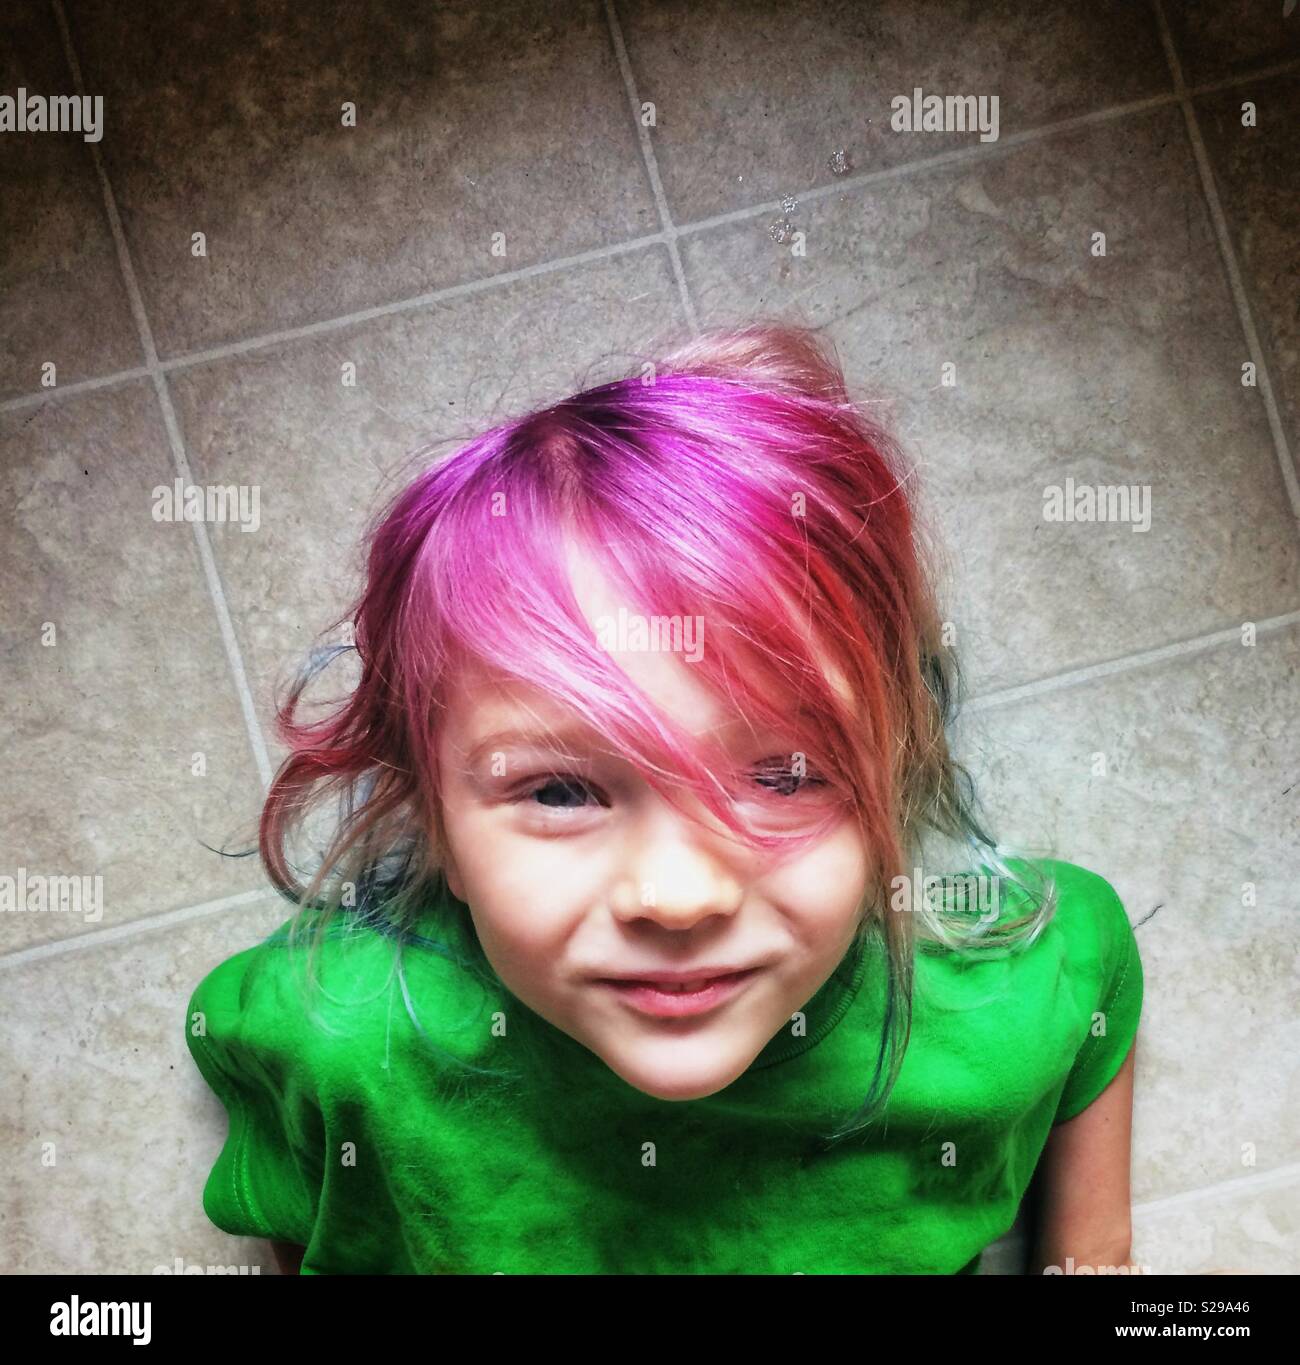 Small smiling girl with bright pink colored hair. Stock Photo